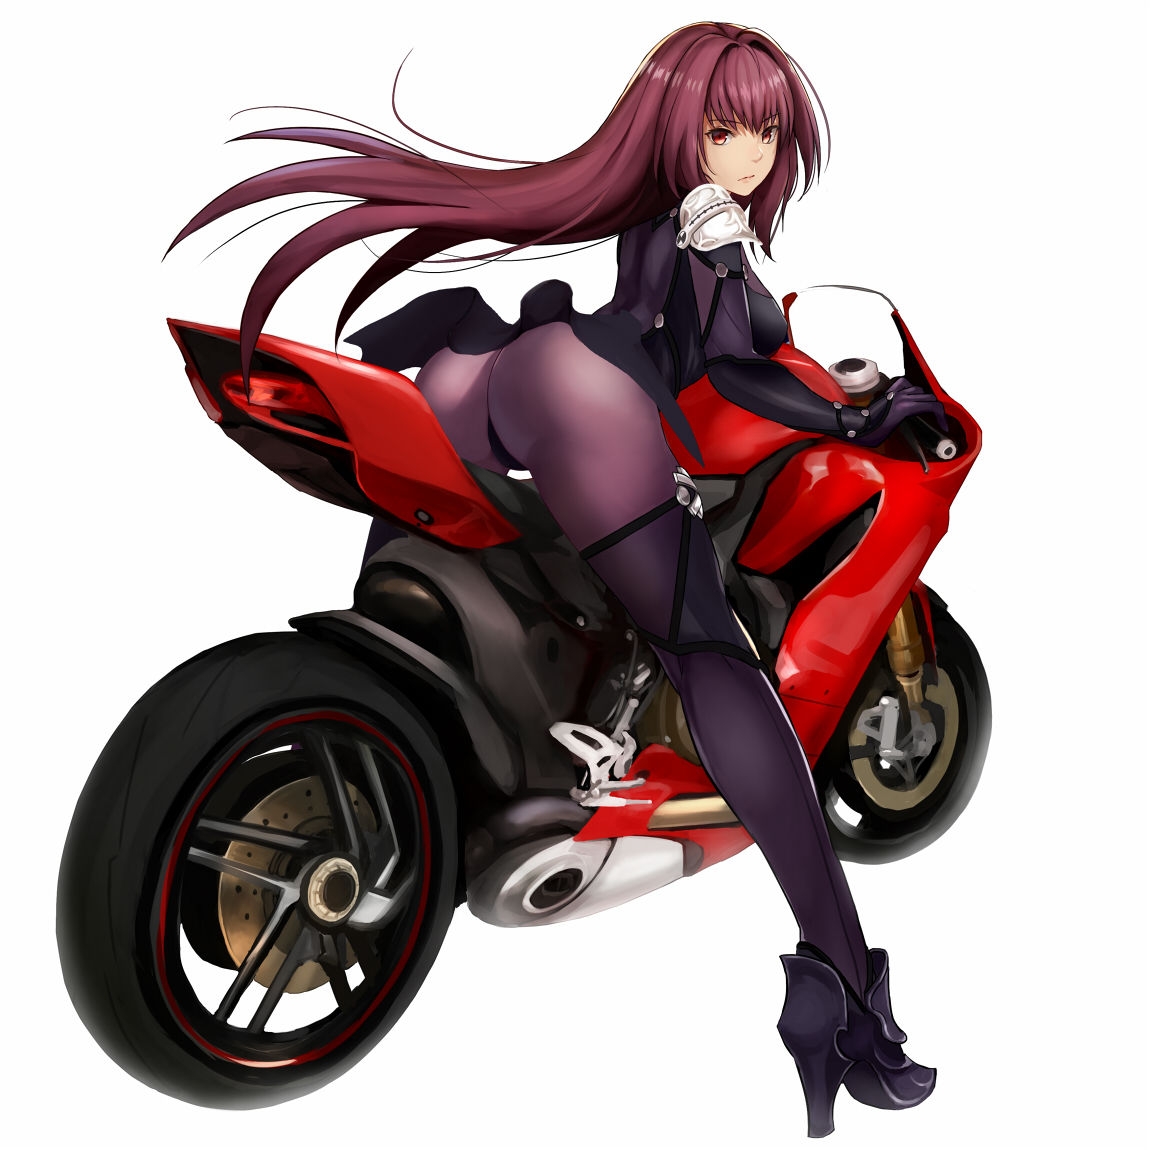 Scathach Fate/Grand Order 65